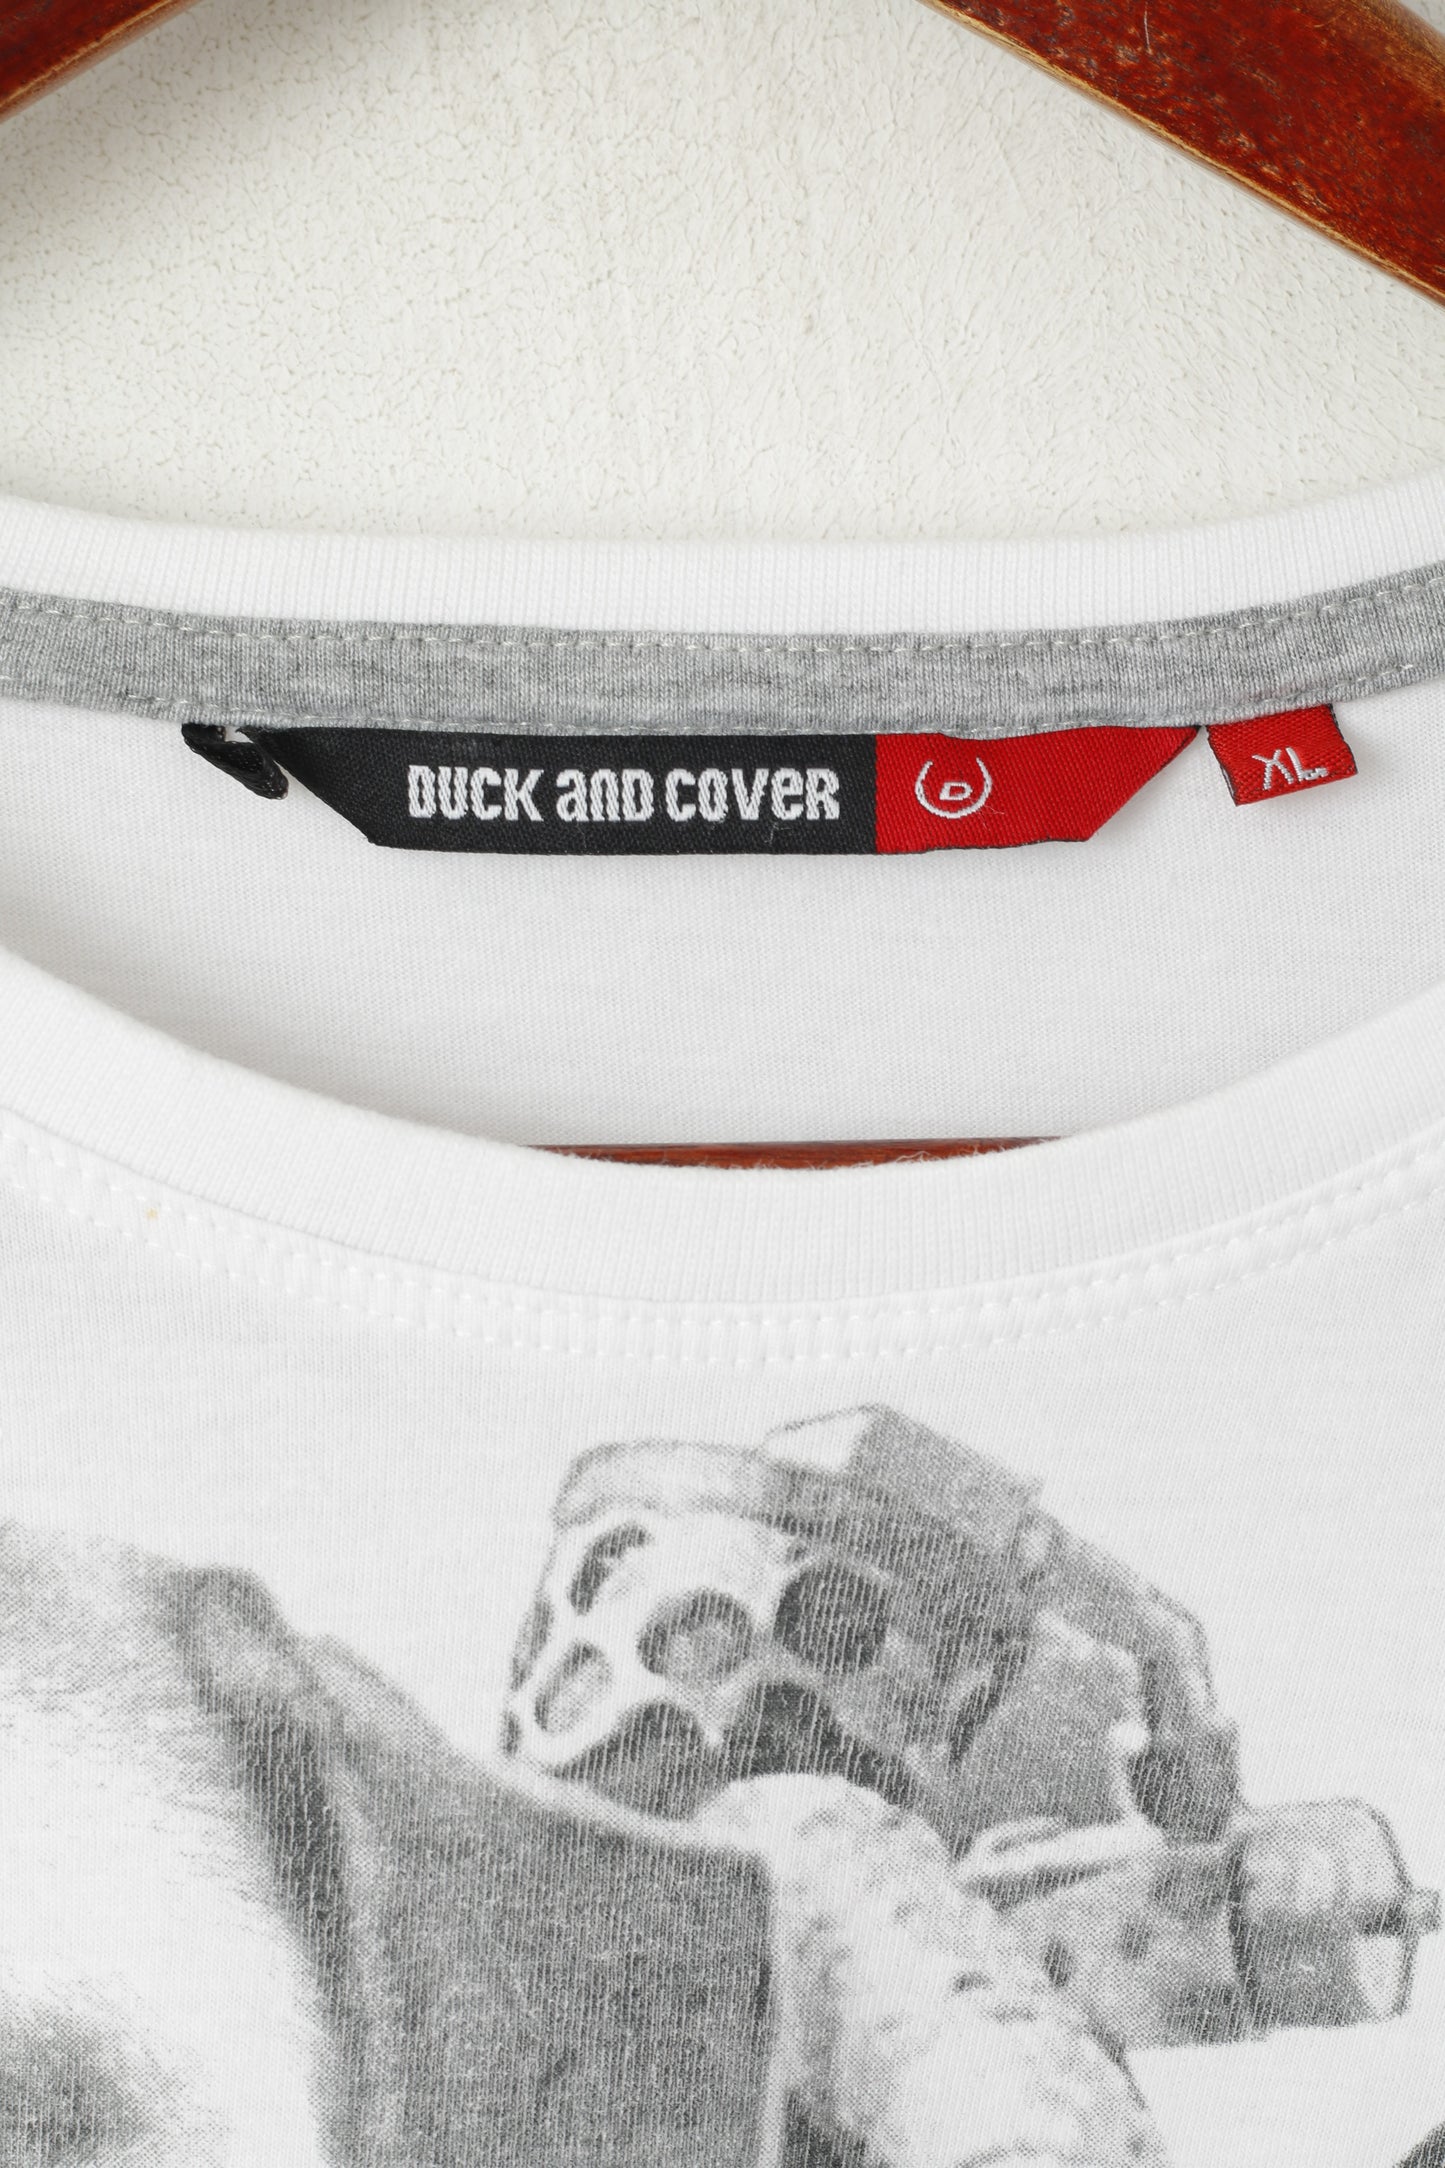 Duck and Cover Men XL (L) T- Shirt White Cotton Graphic Crew Neck Pug Jeatpag Top